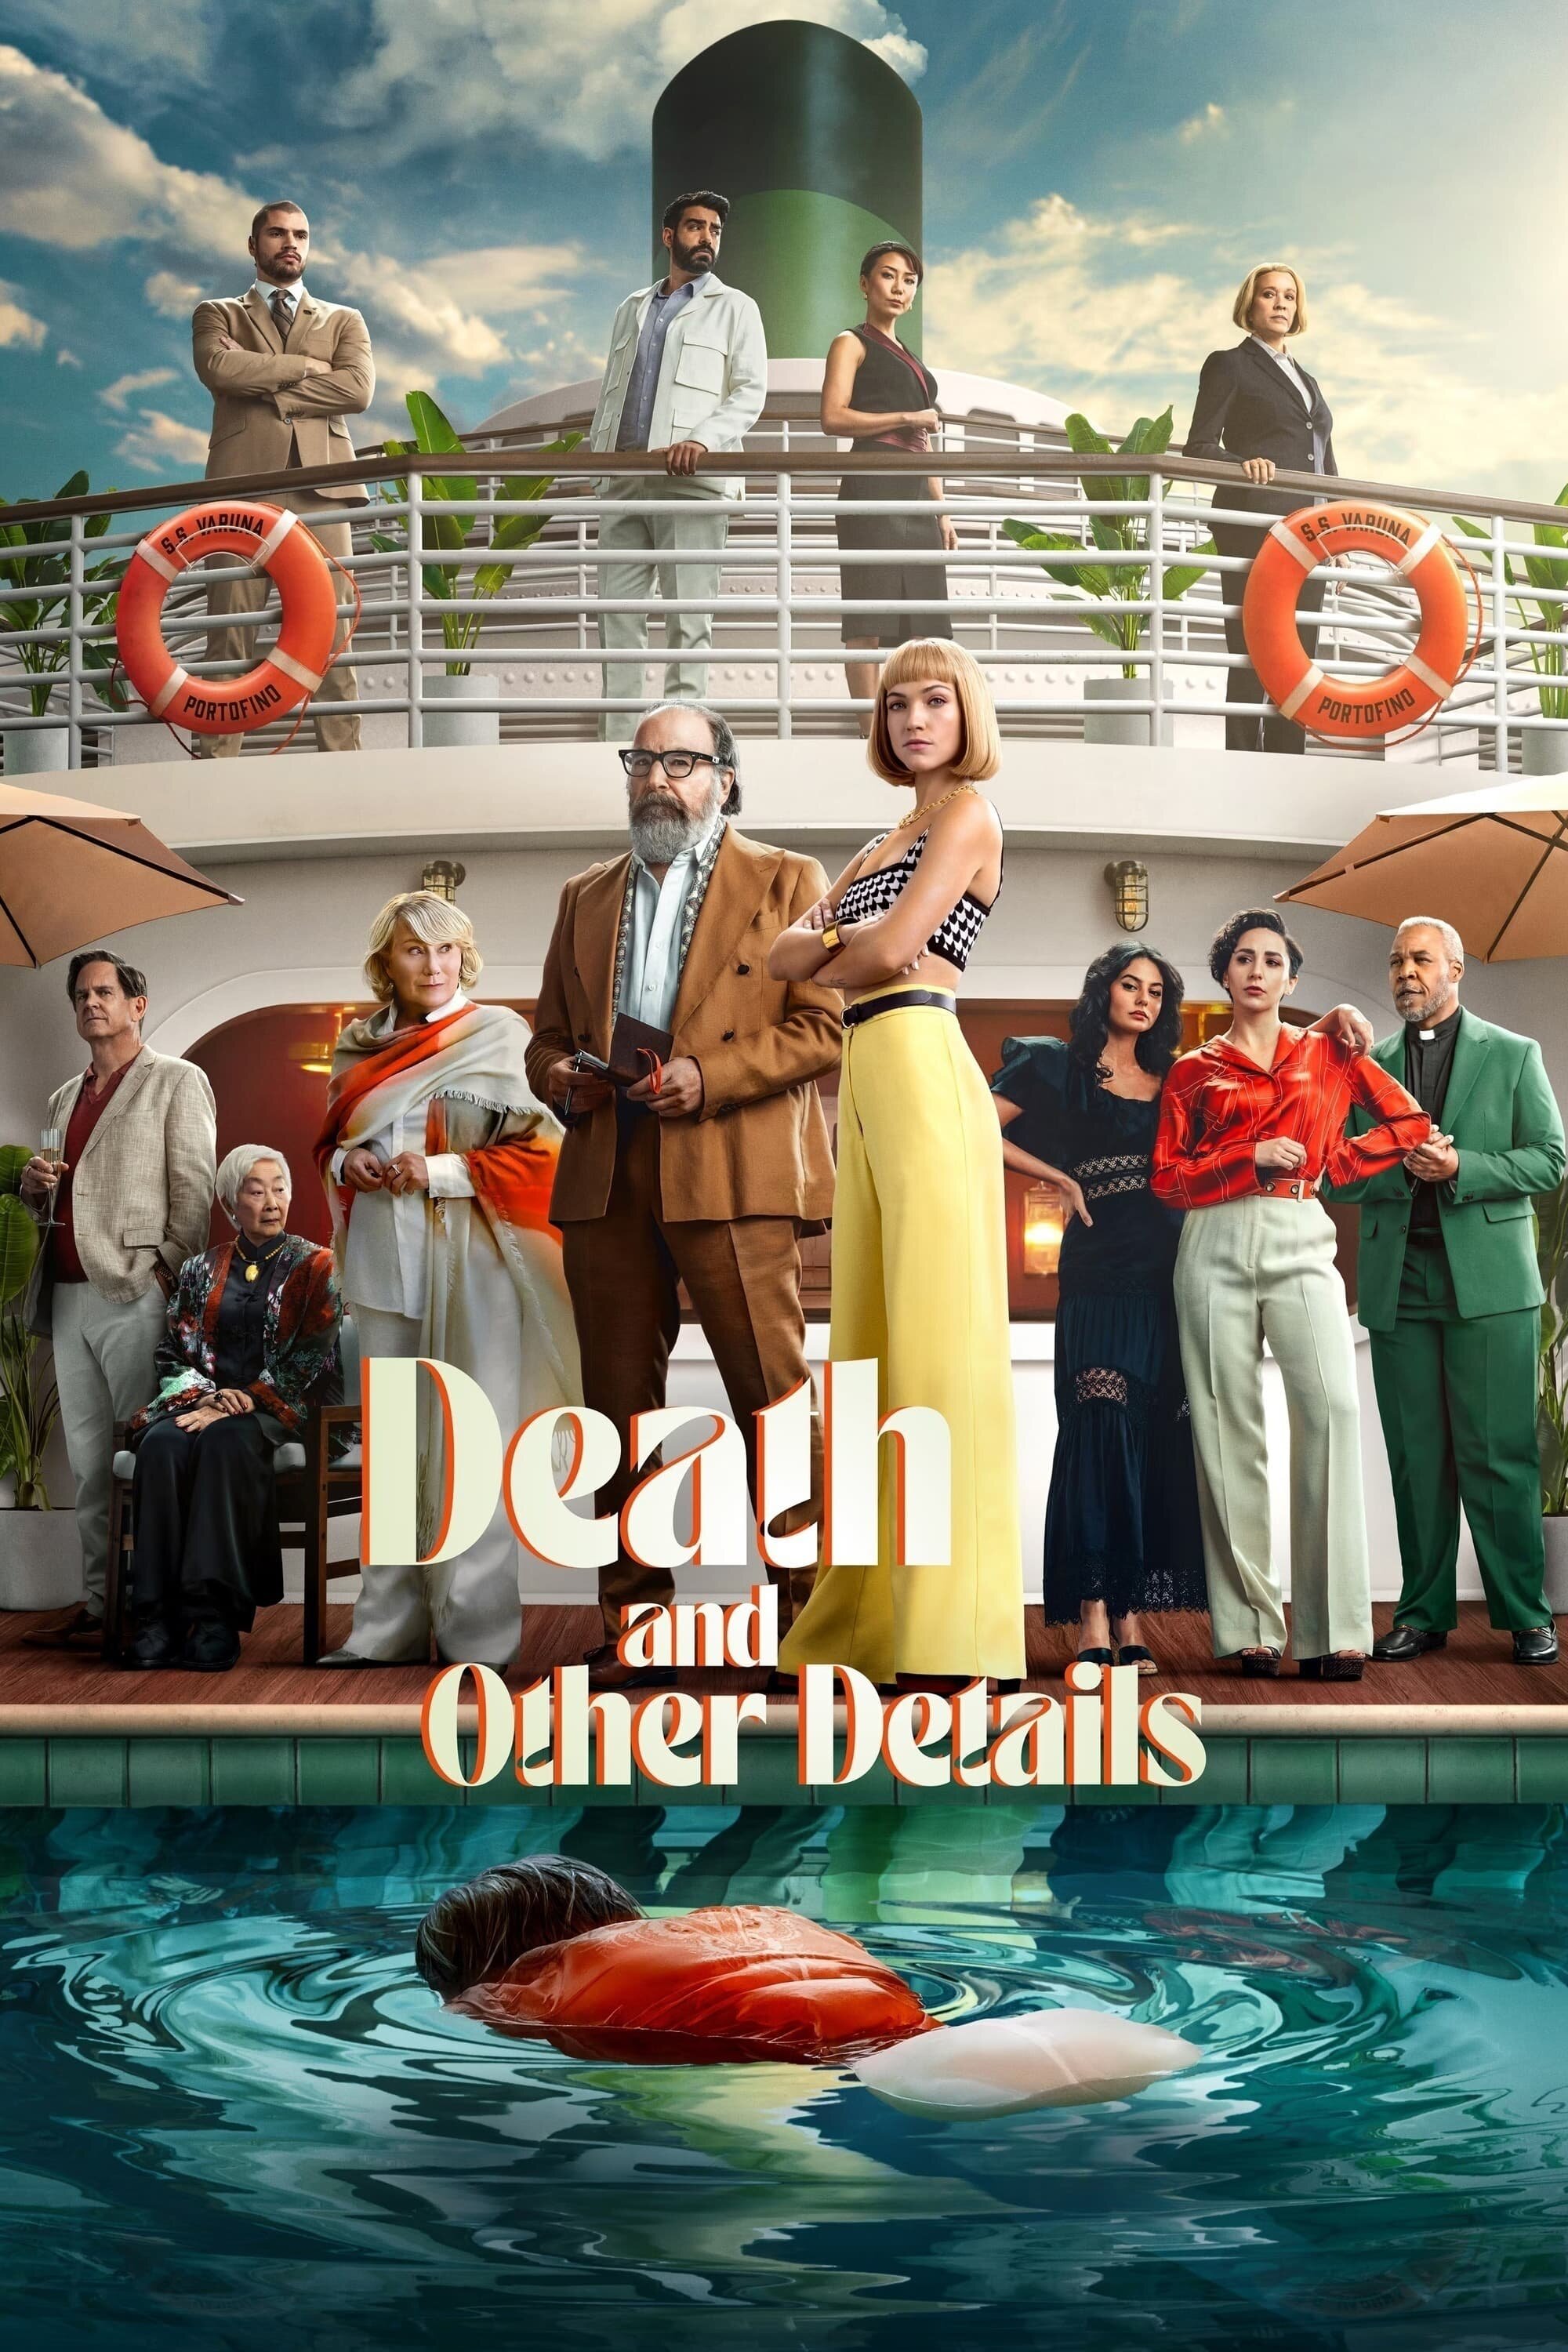 Death and Other Details S01E10 DV HDR 2160p WEB H265-SuccessfulCrab